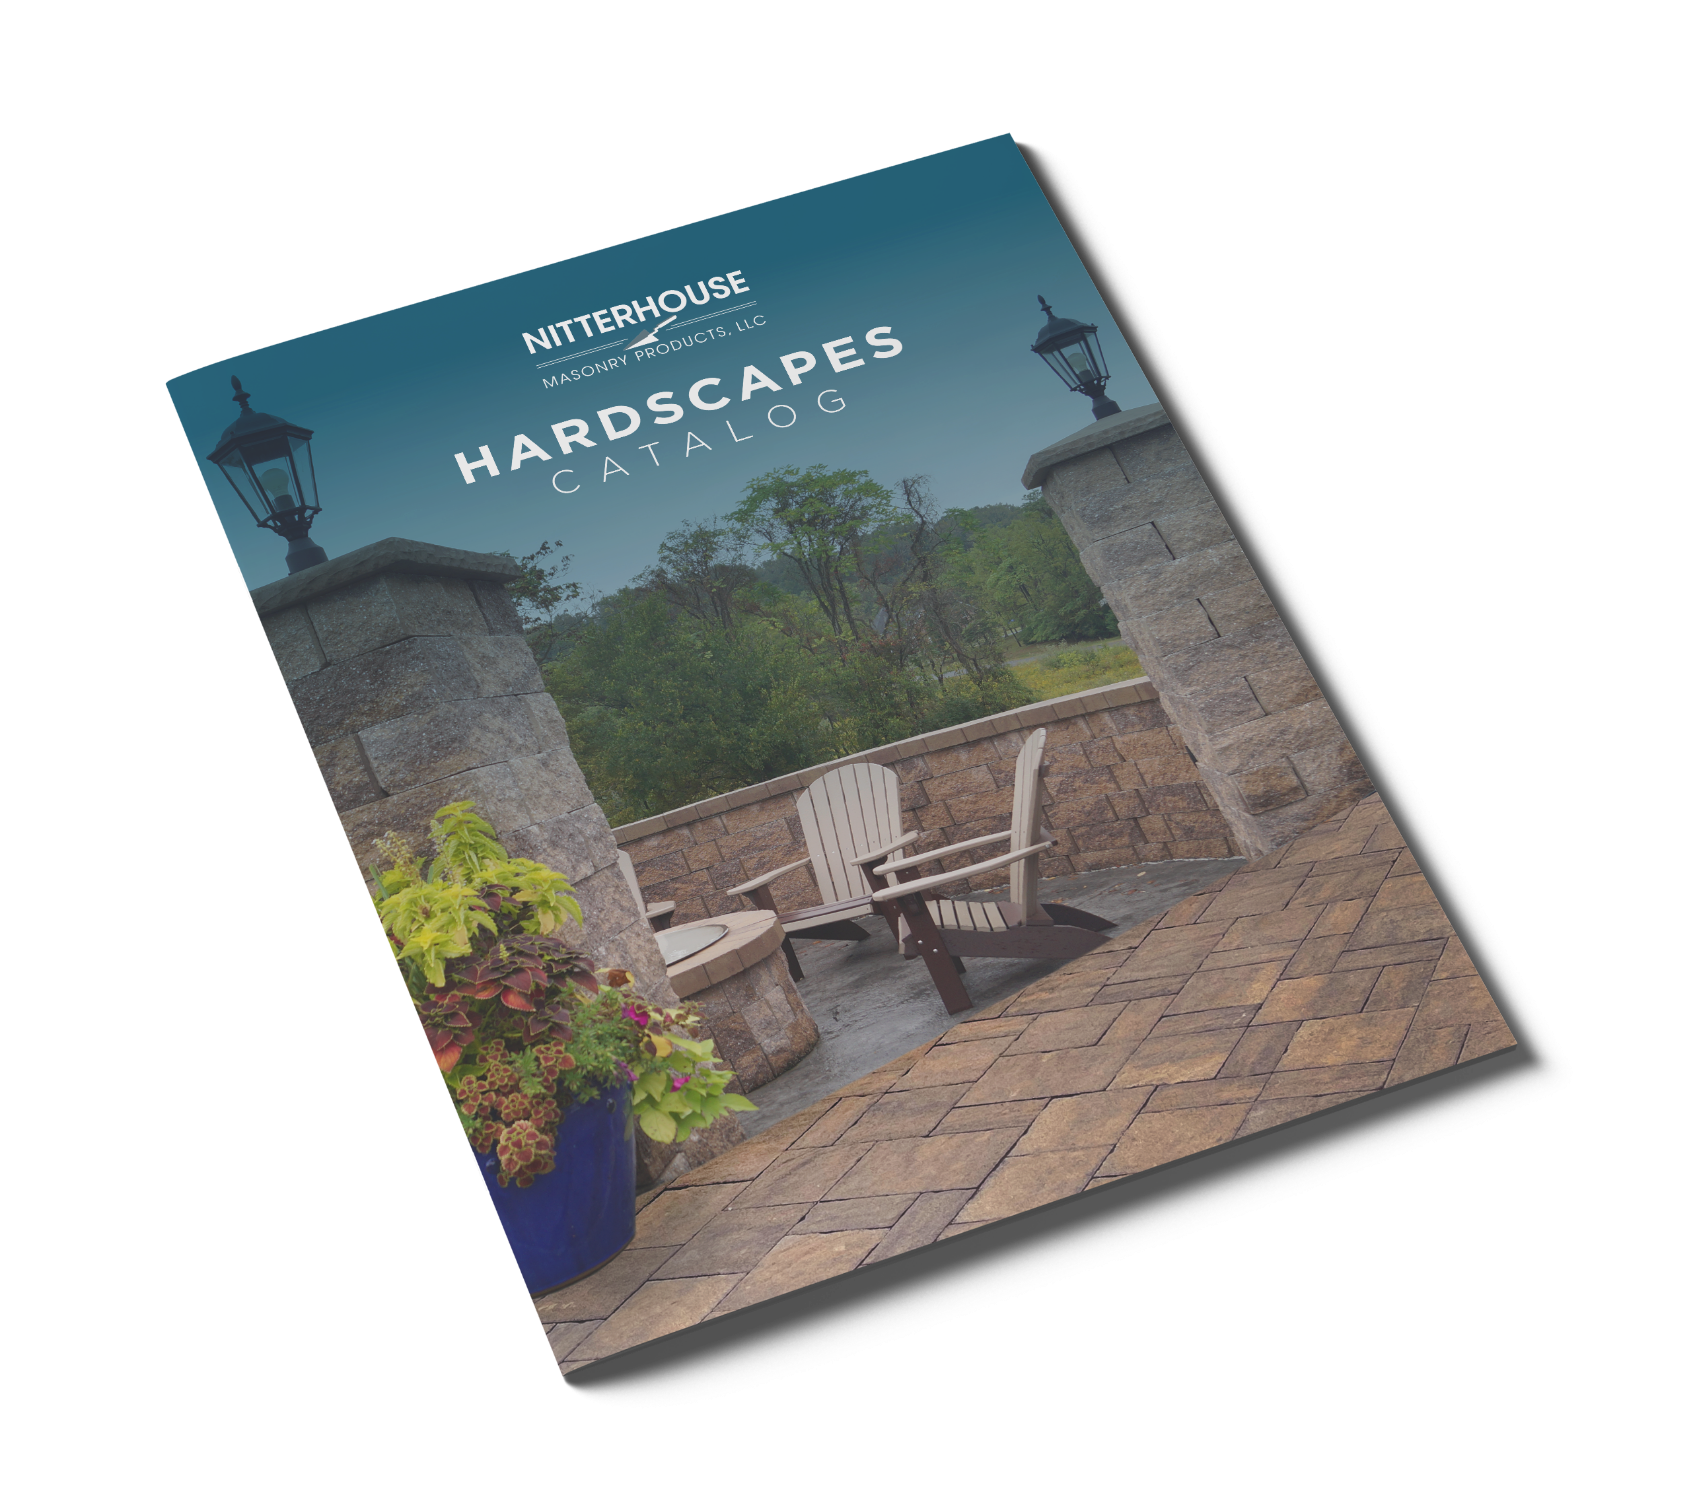 An angled view of a Nitterhouse Hardscapes catalog with a cover featuring an outdoor space with stone pillars, paving, and patio furniture, set against a natural backdrop.